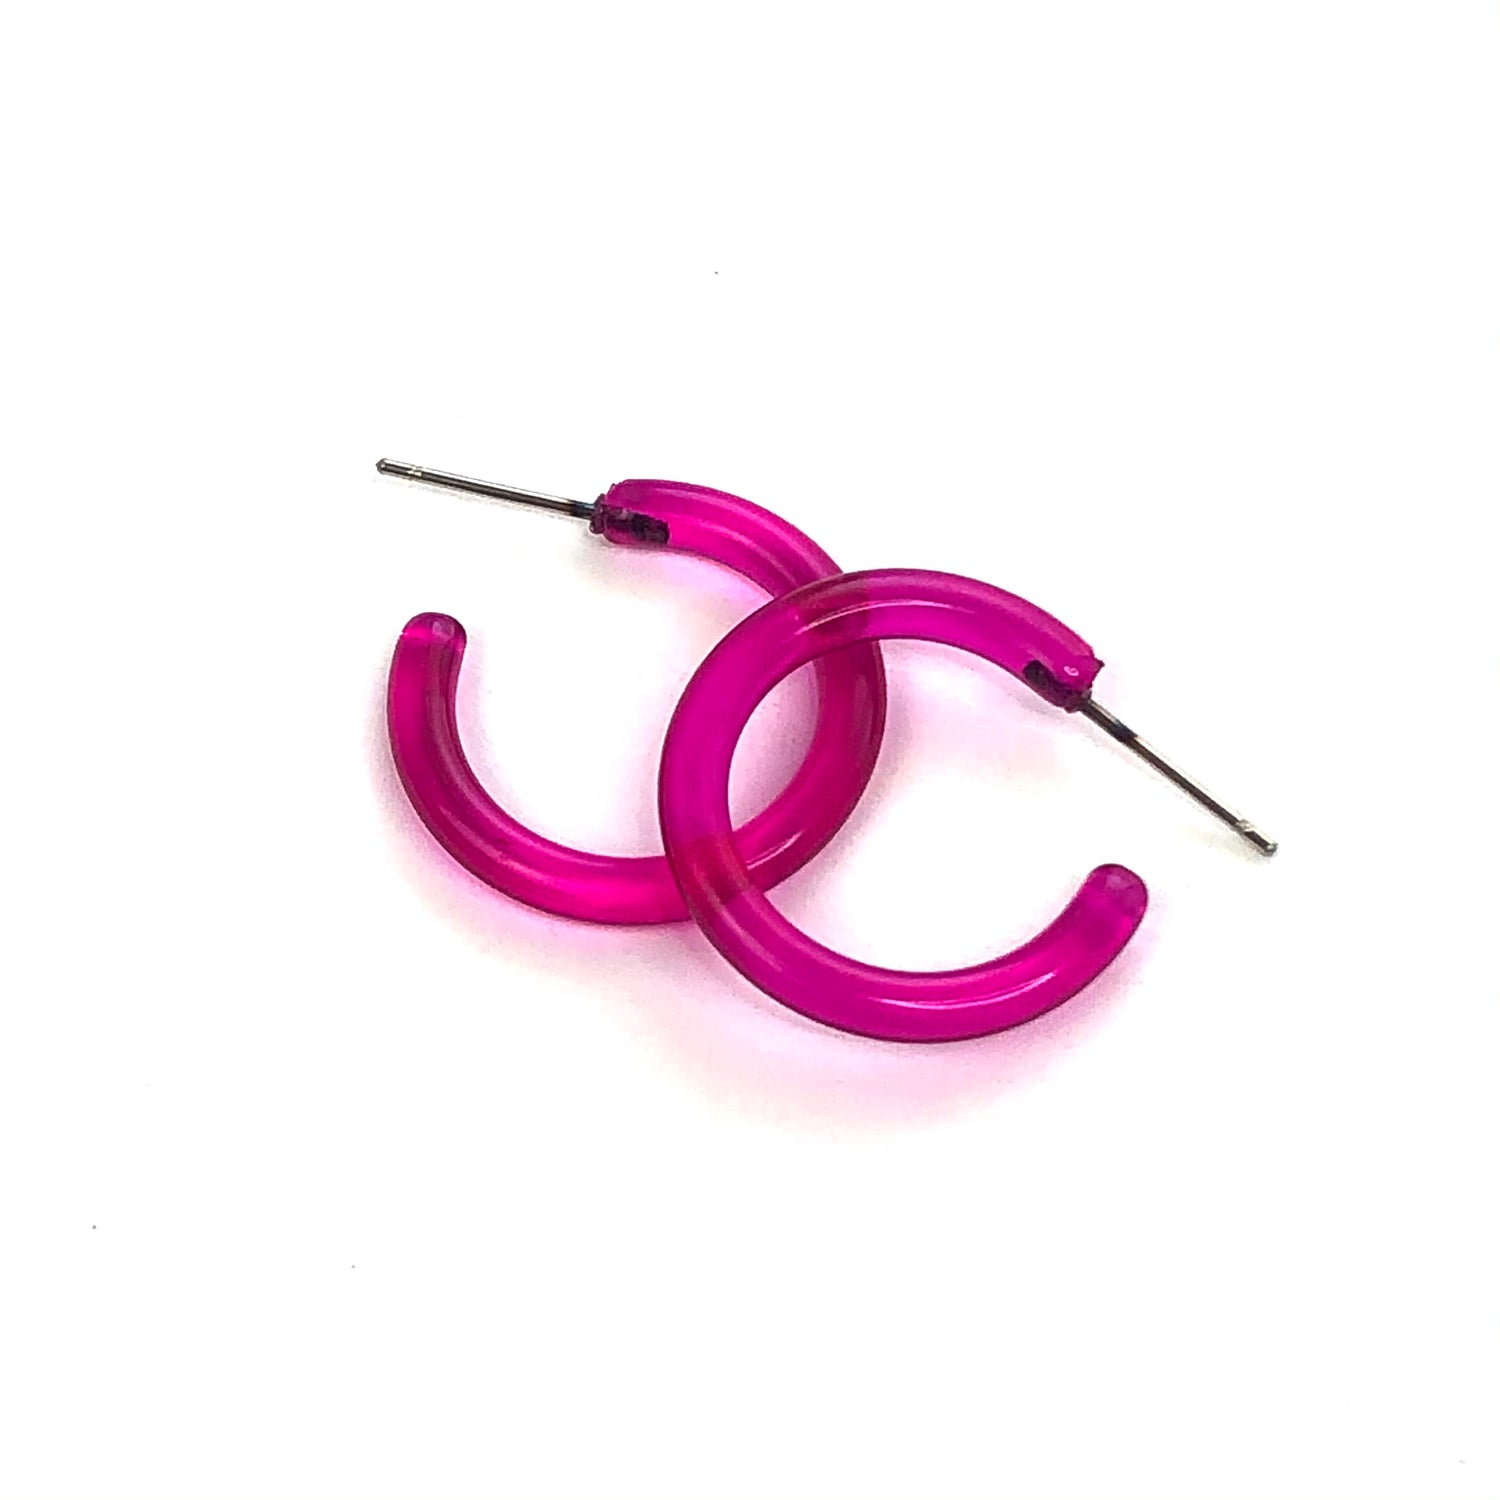 bright pink hoops